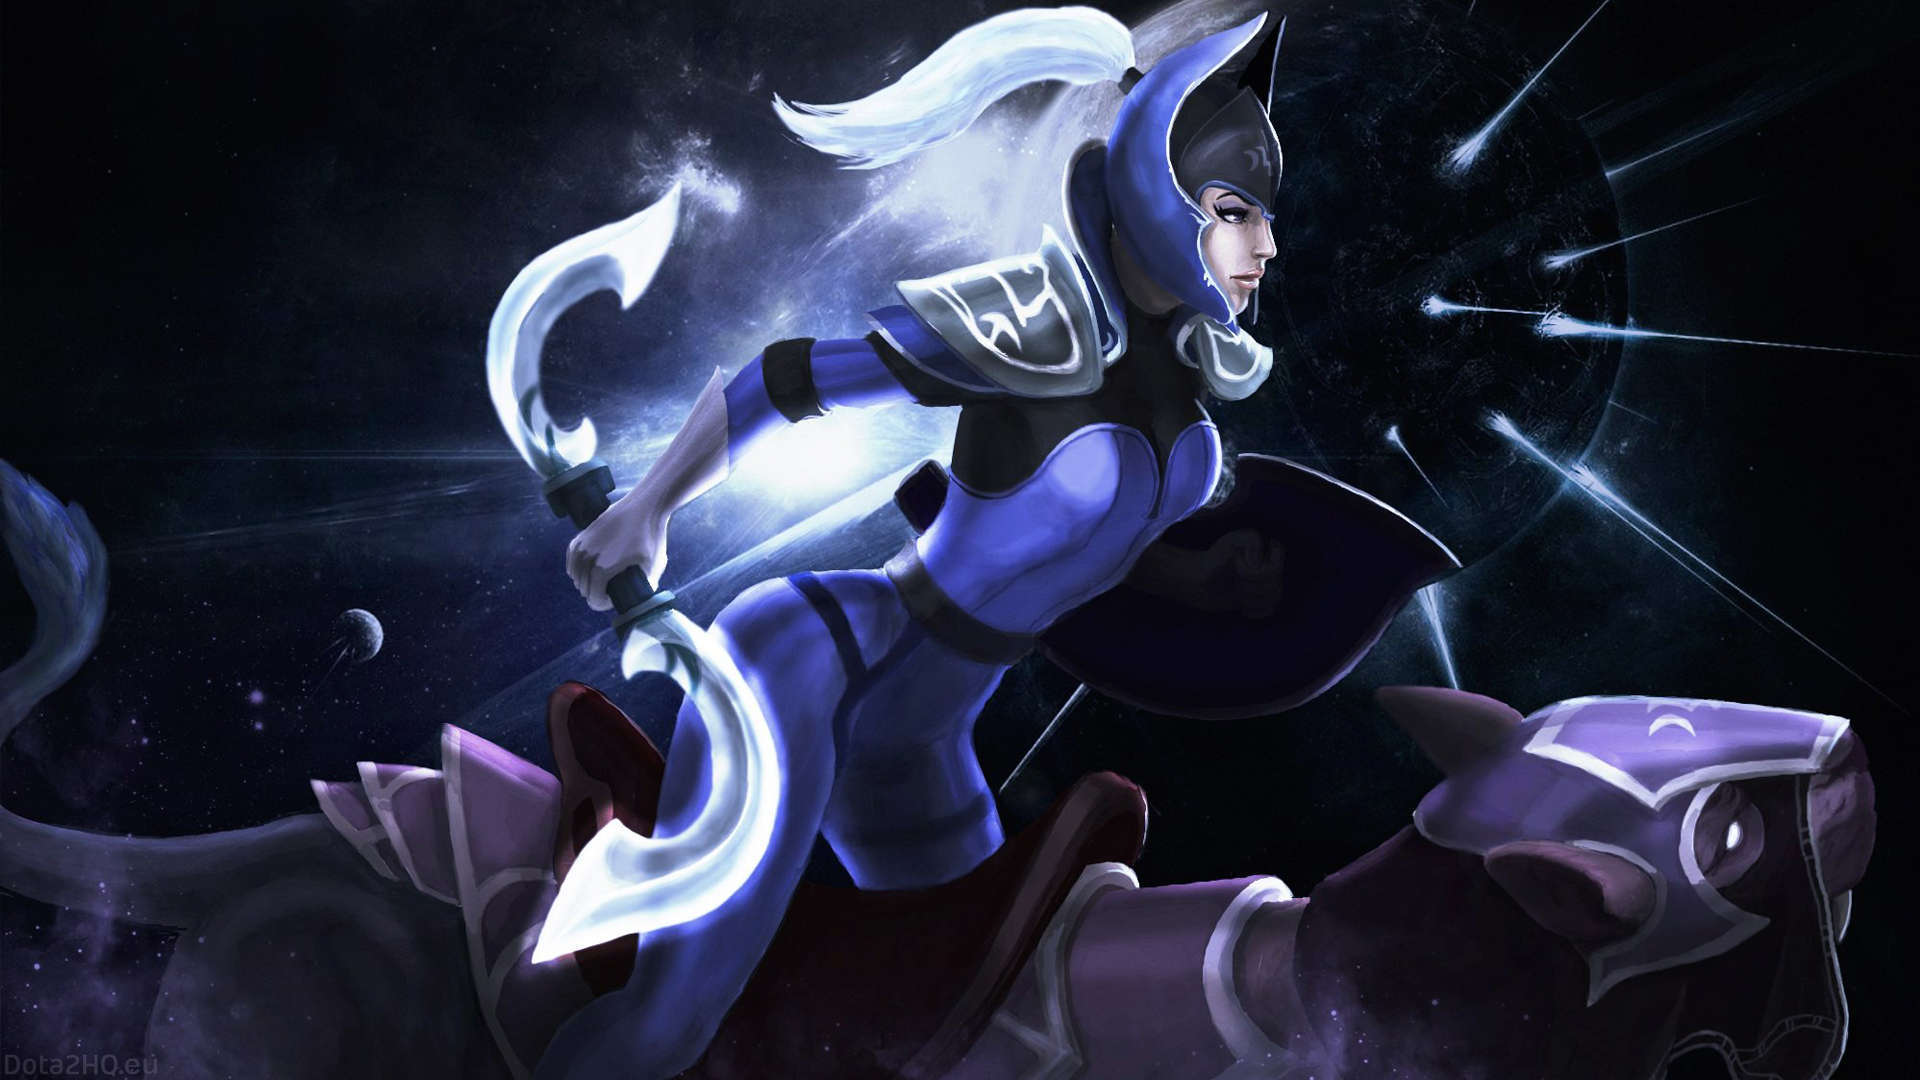 🔥 Download Luna Moon Rider Dota Girl Hd Wallpaper Hero Image Picture Game By Dsimmons Dota 2